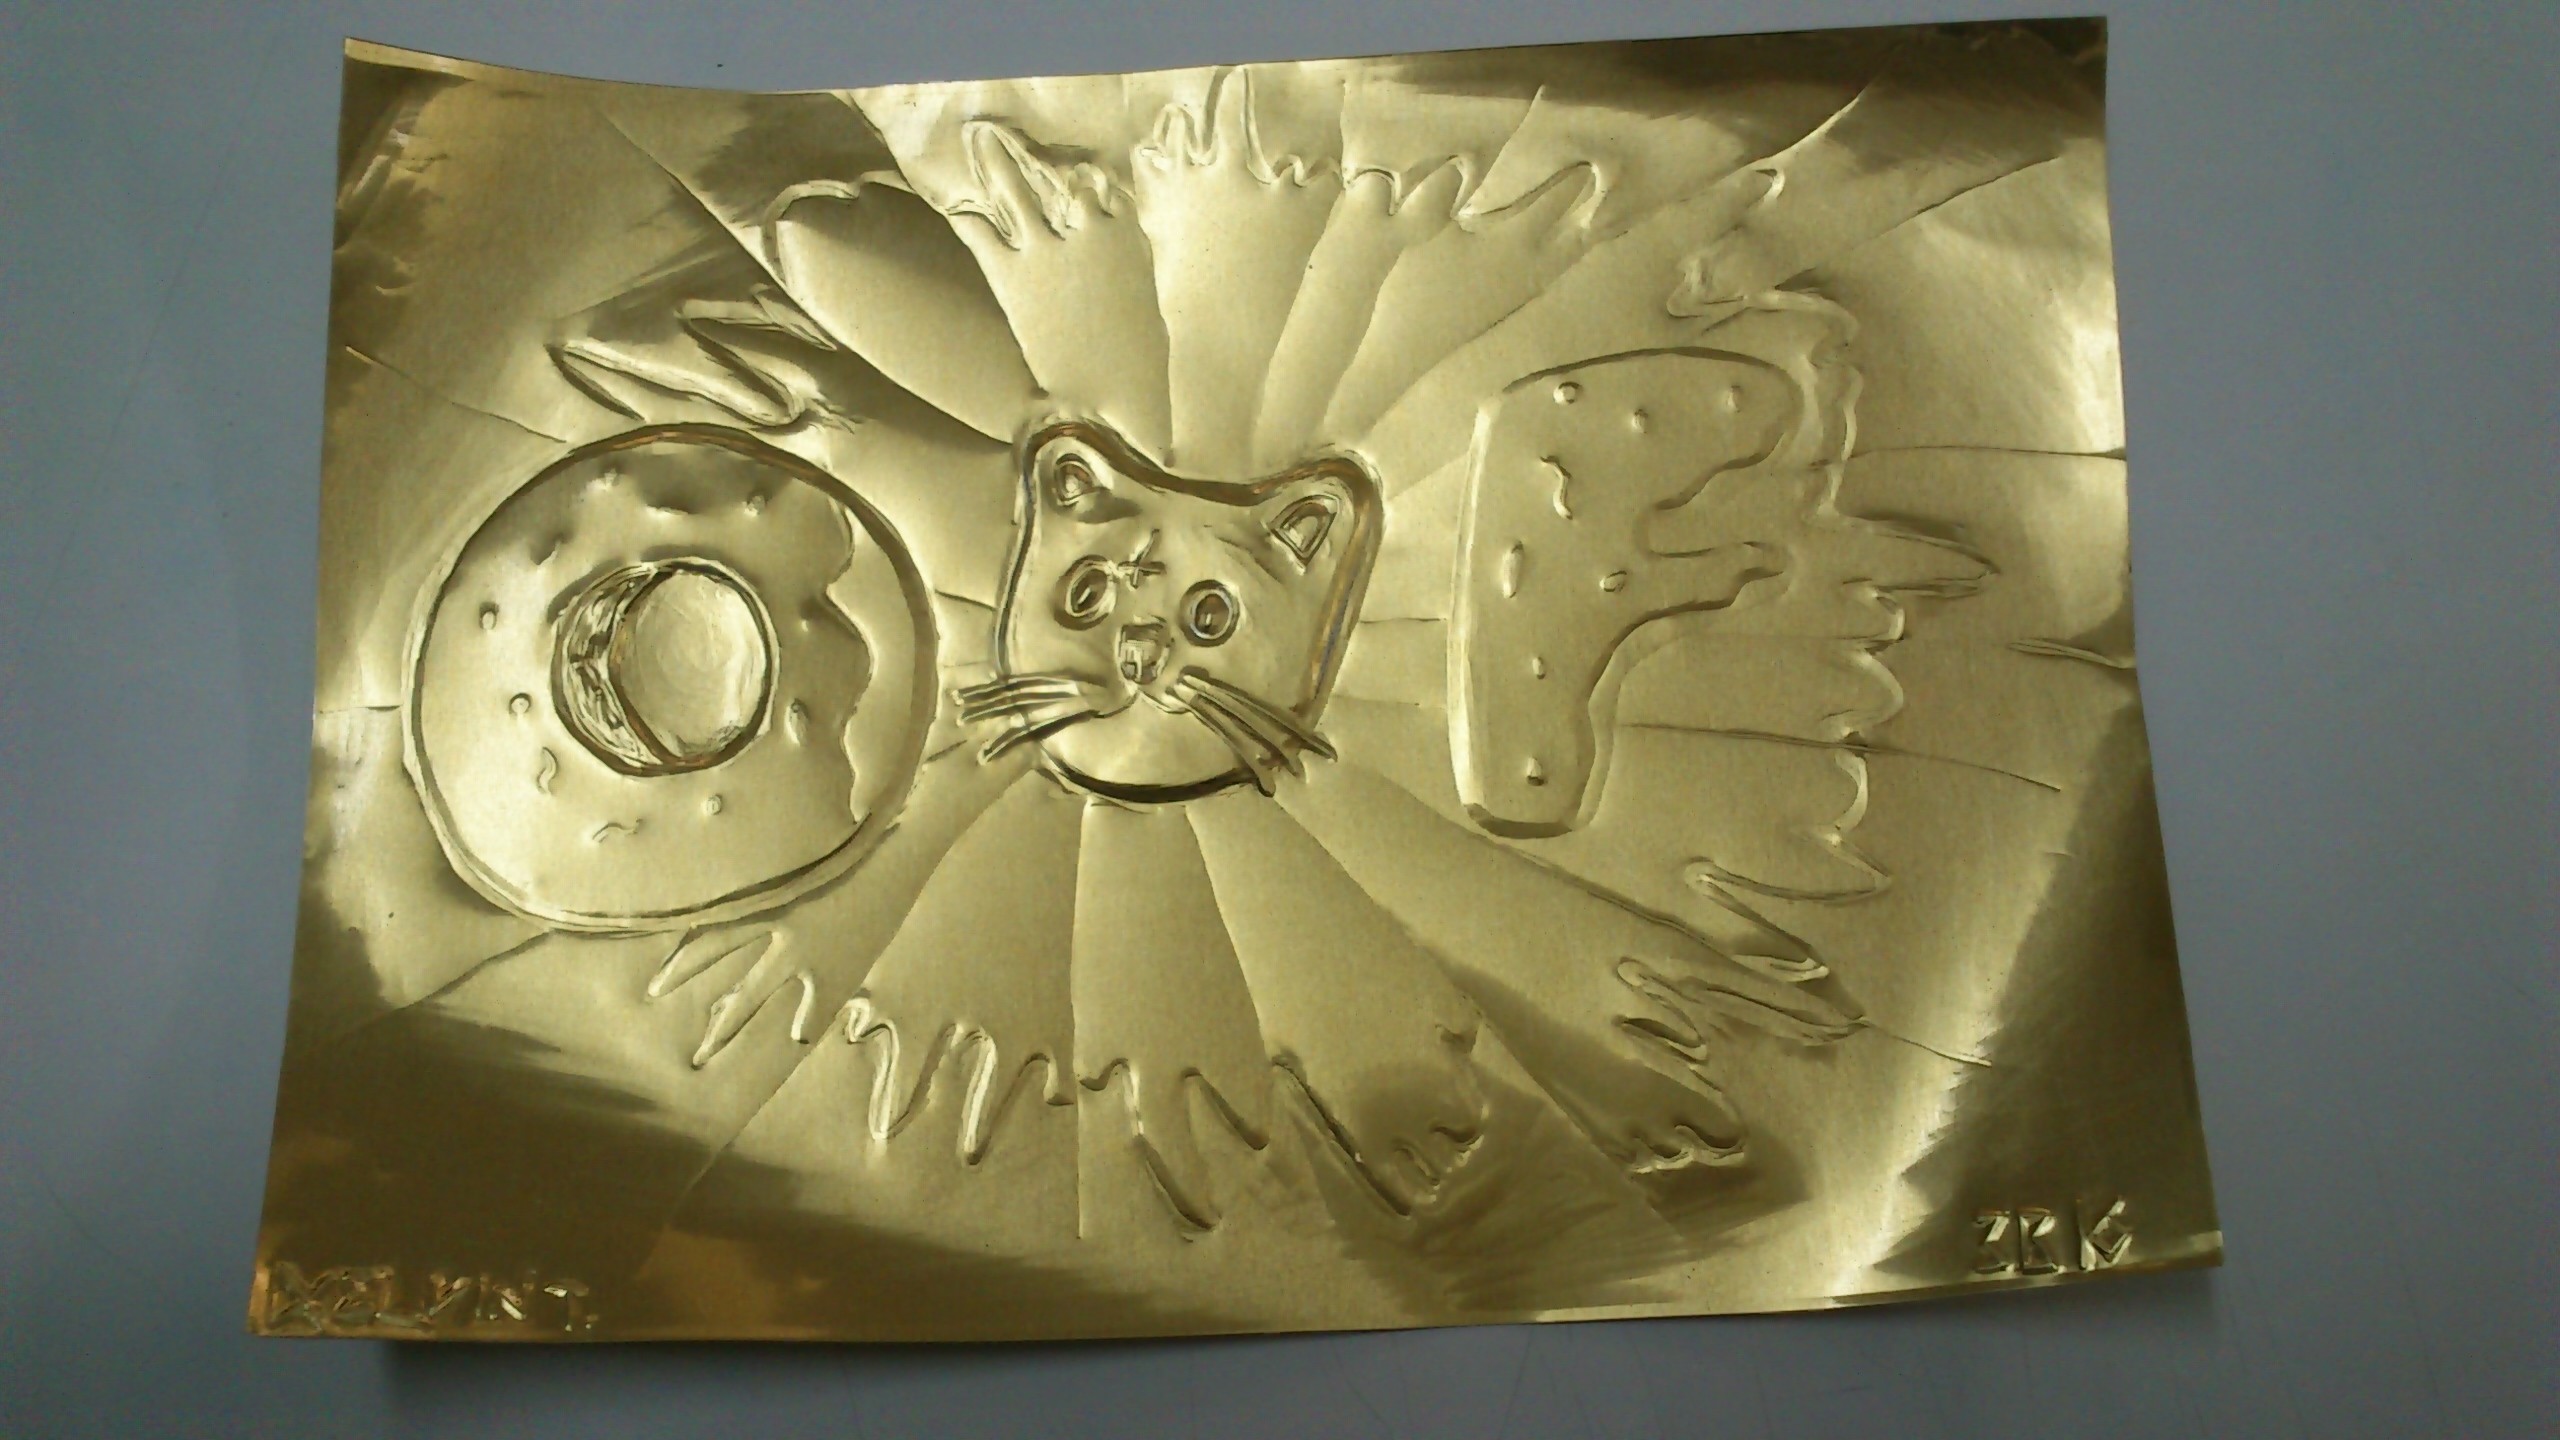 2560x1440 ... Odd Future Logo and Cat on copper board by KelvinTang